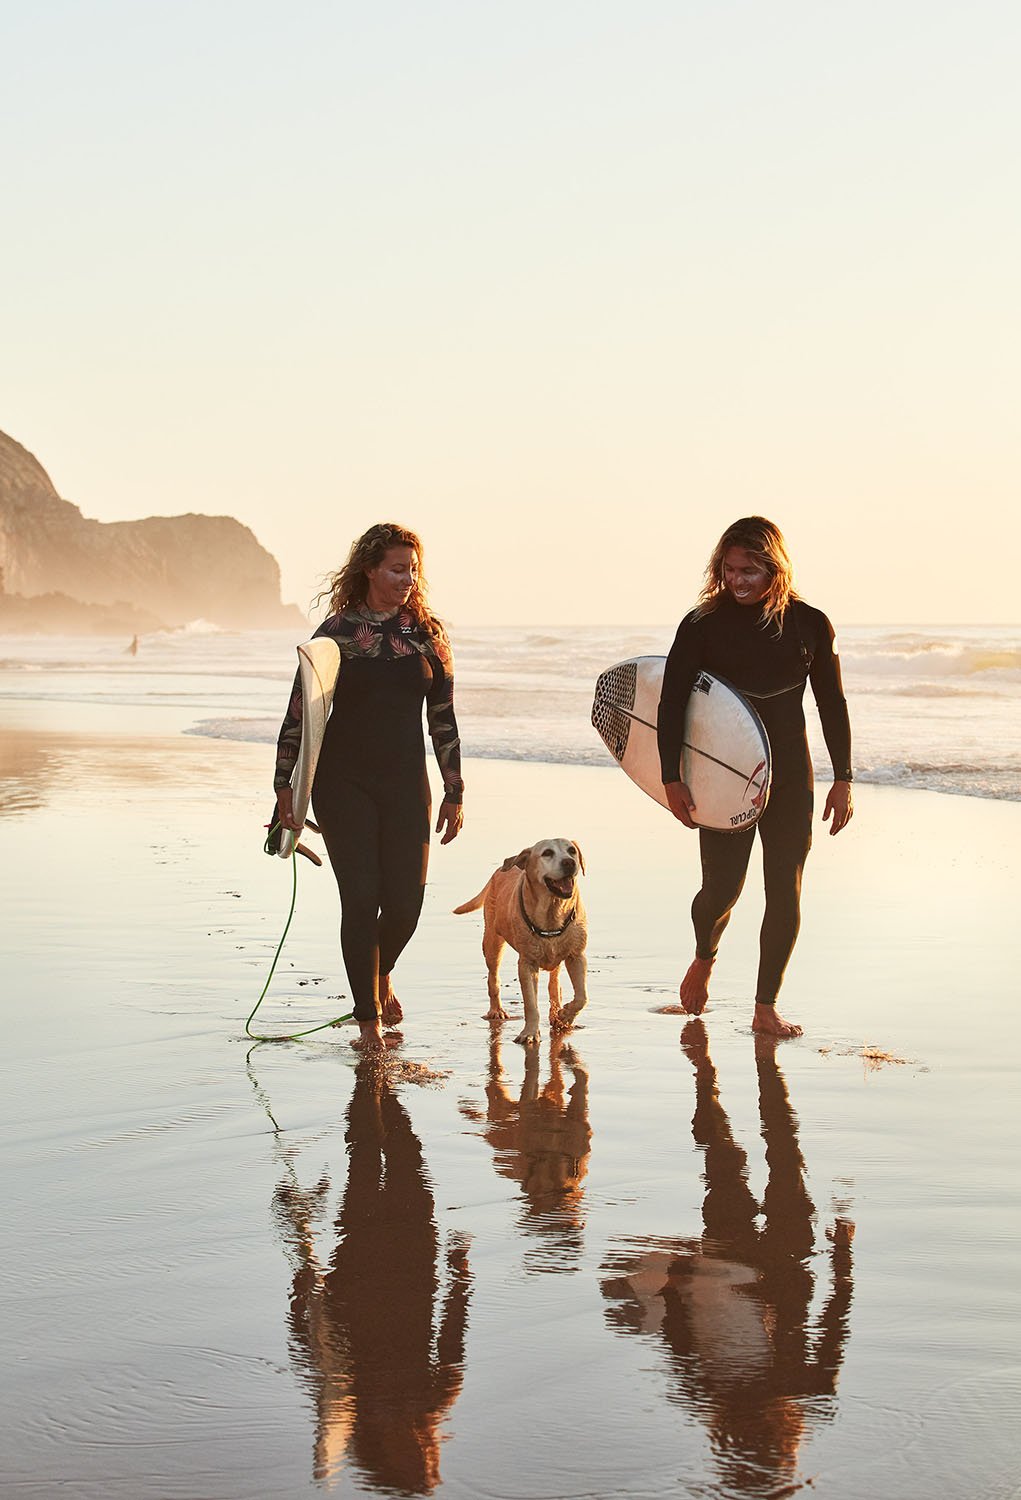 Richard James Taylor photographs sibling surfers for National Geographic Traveller